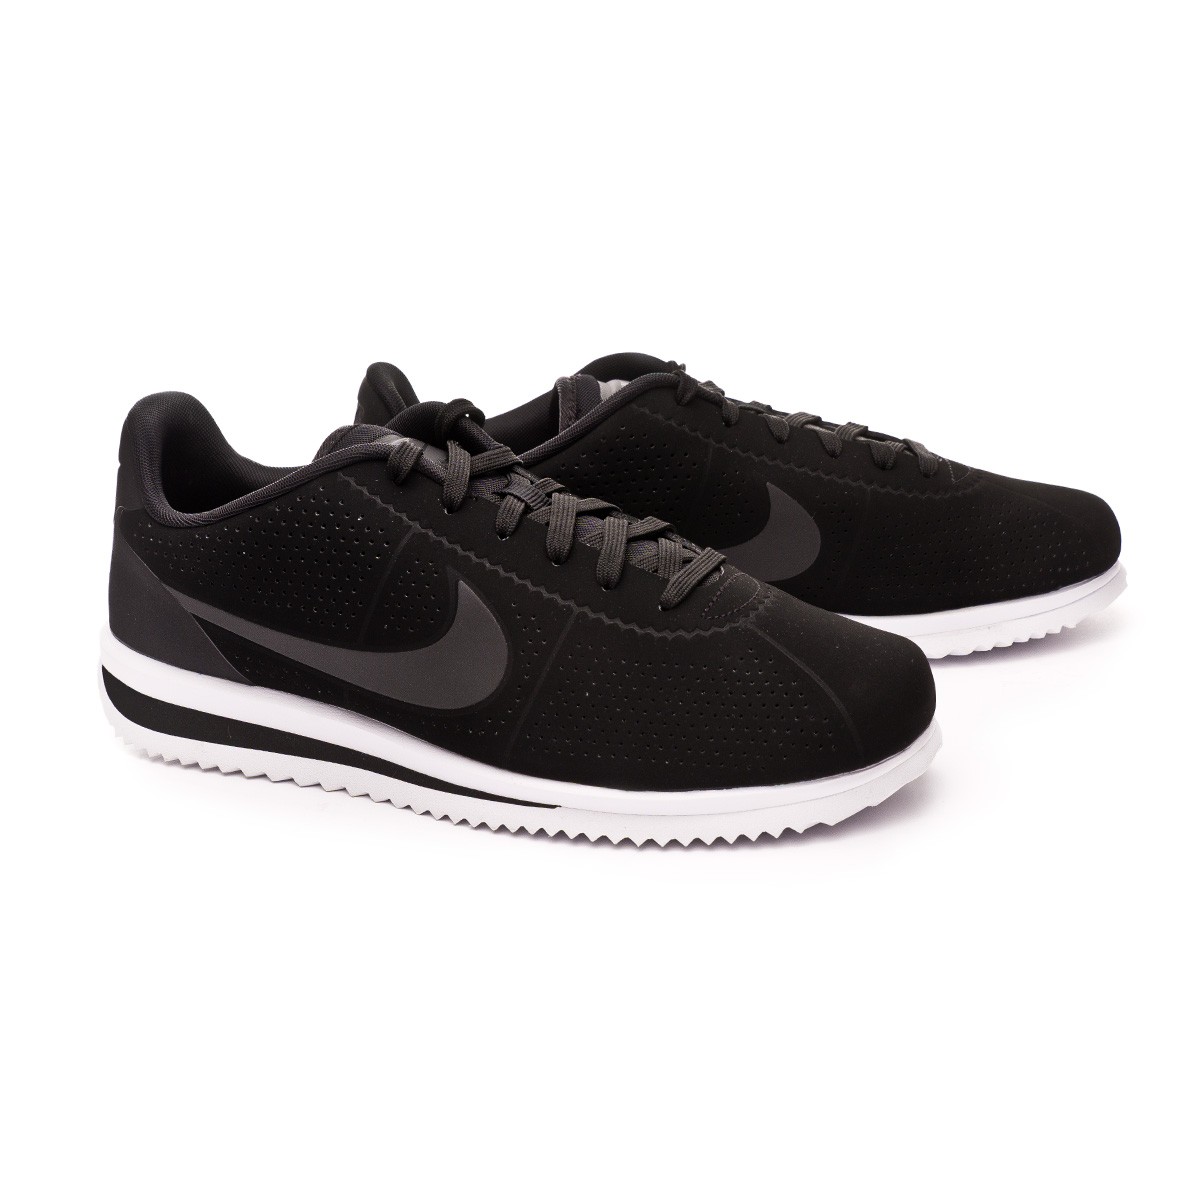 Trainers Nike Cortez Ultra Moire 2019 